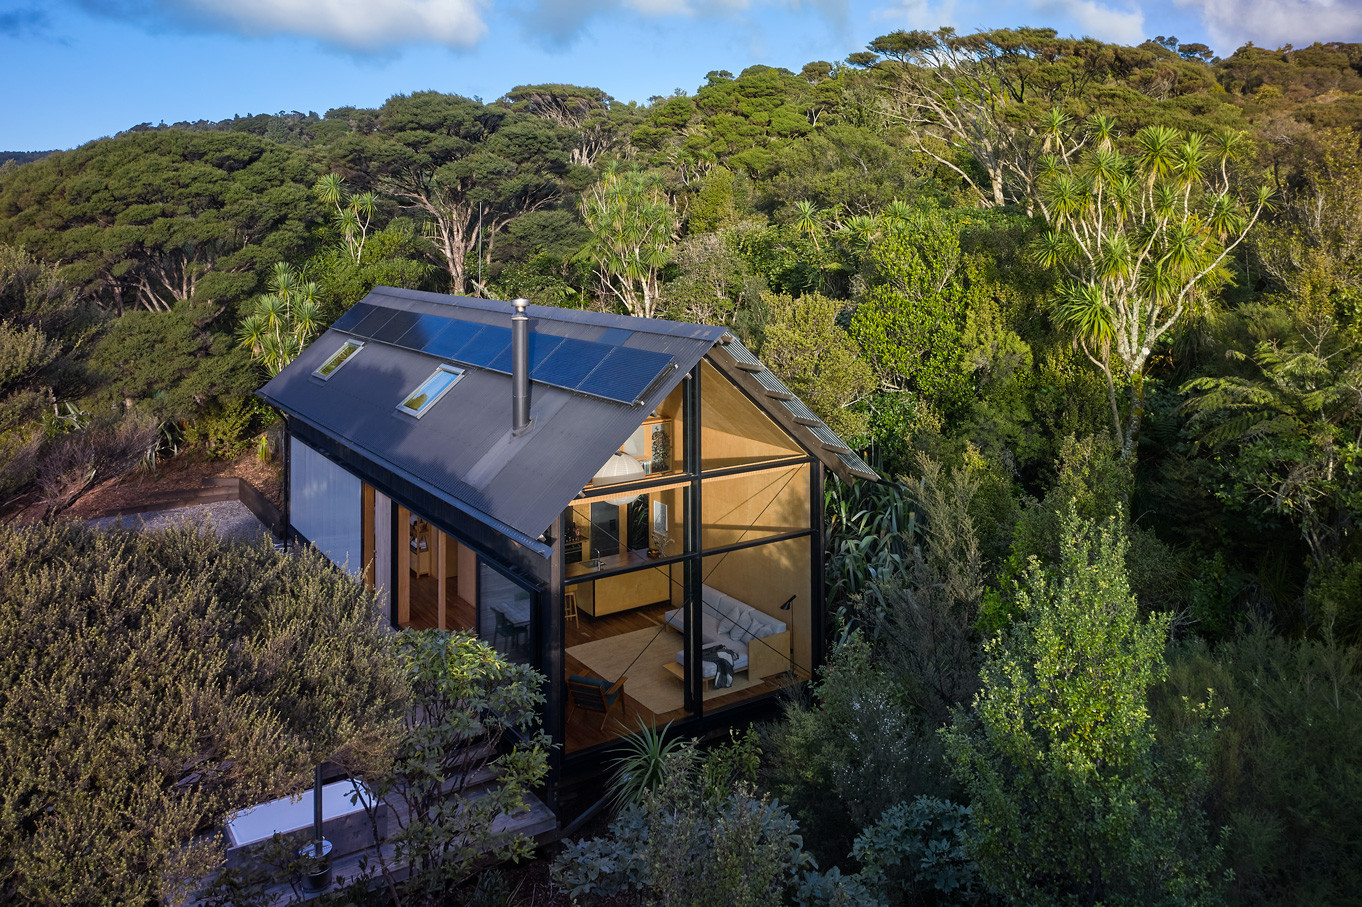 Contemporary house ensconced in nature, boasting a large glass window facade amidst a verdant bush landscape